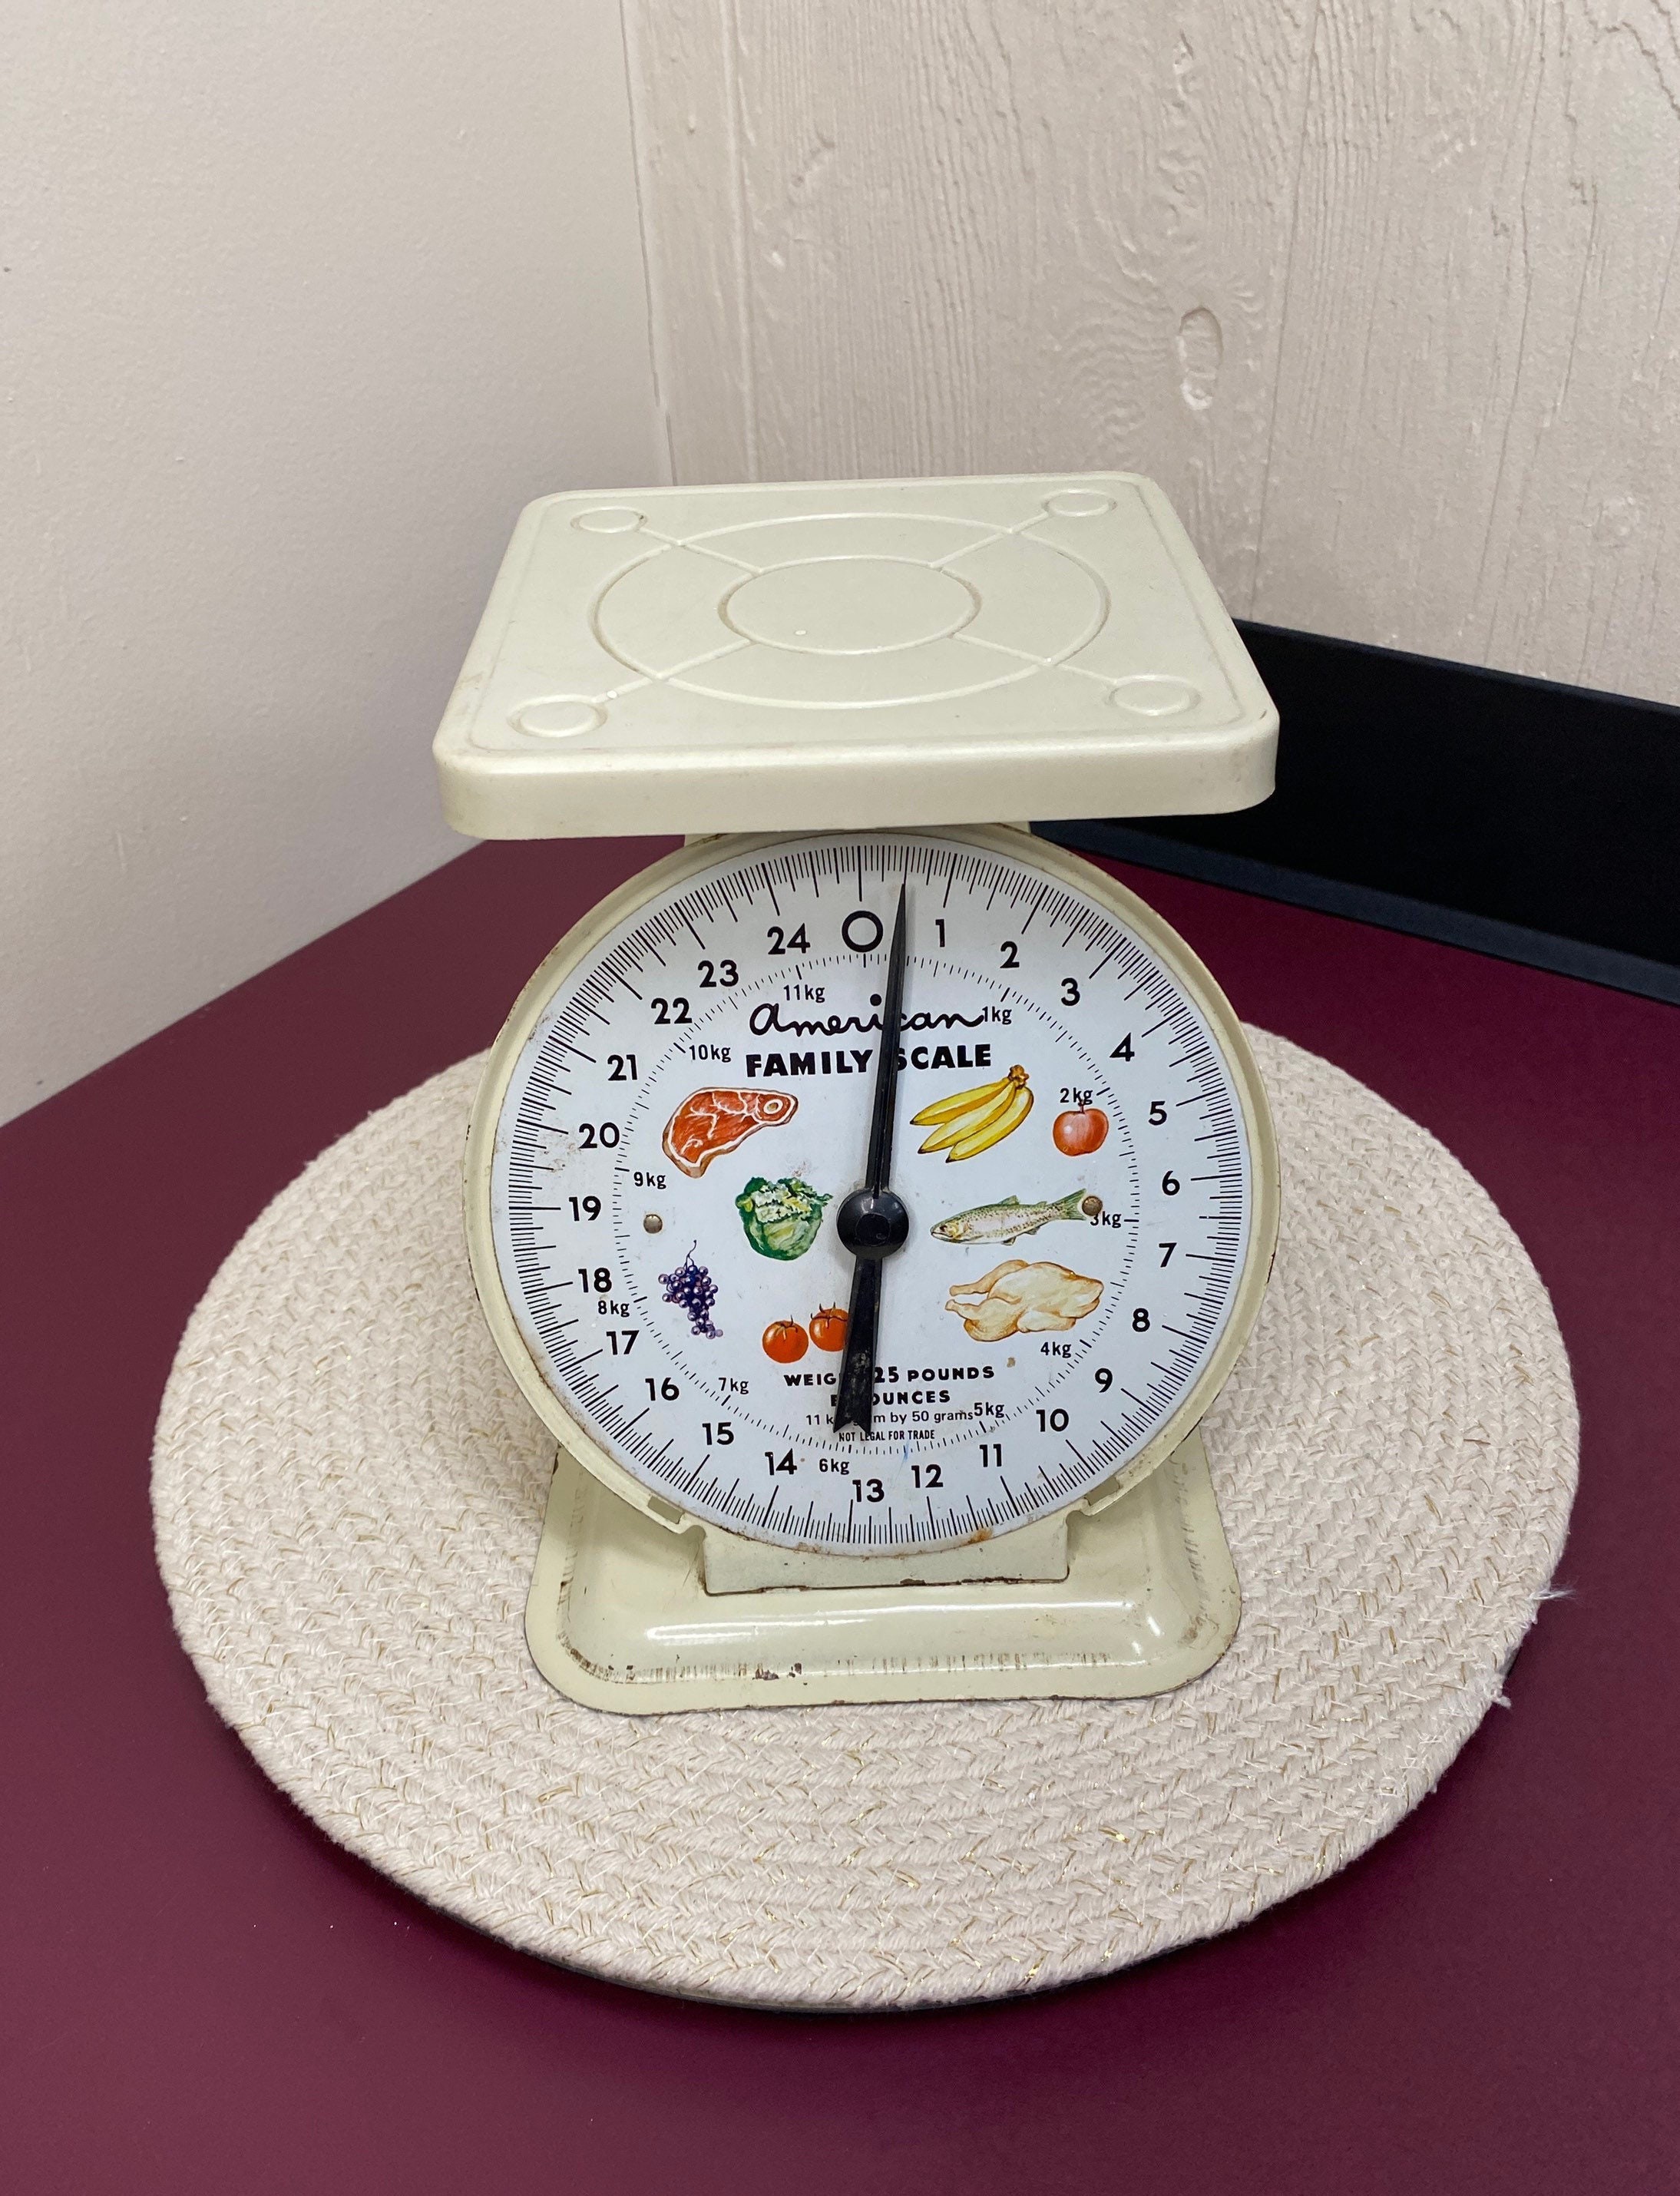 Vintage Scale, White American Family Scale, Kitchen Scale